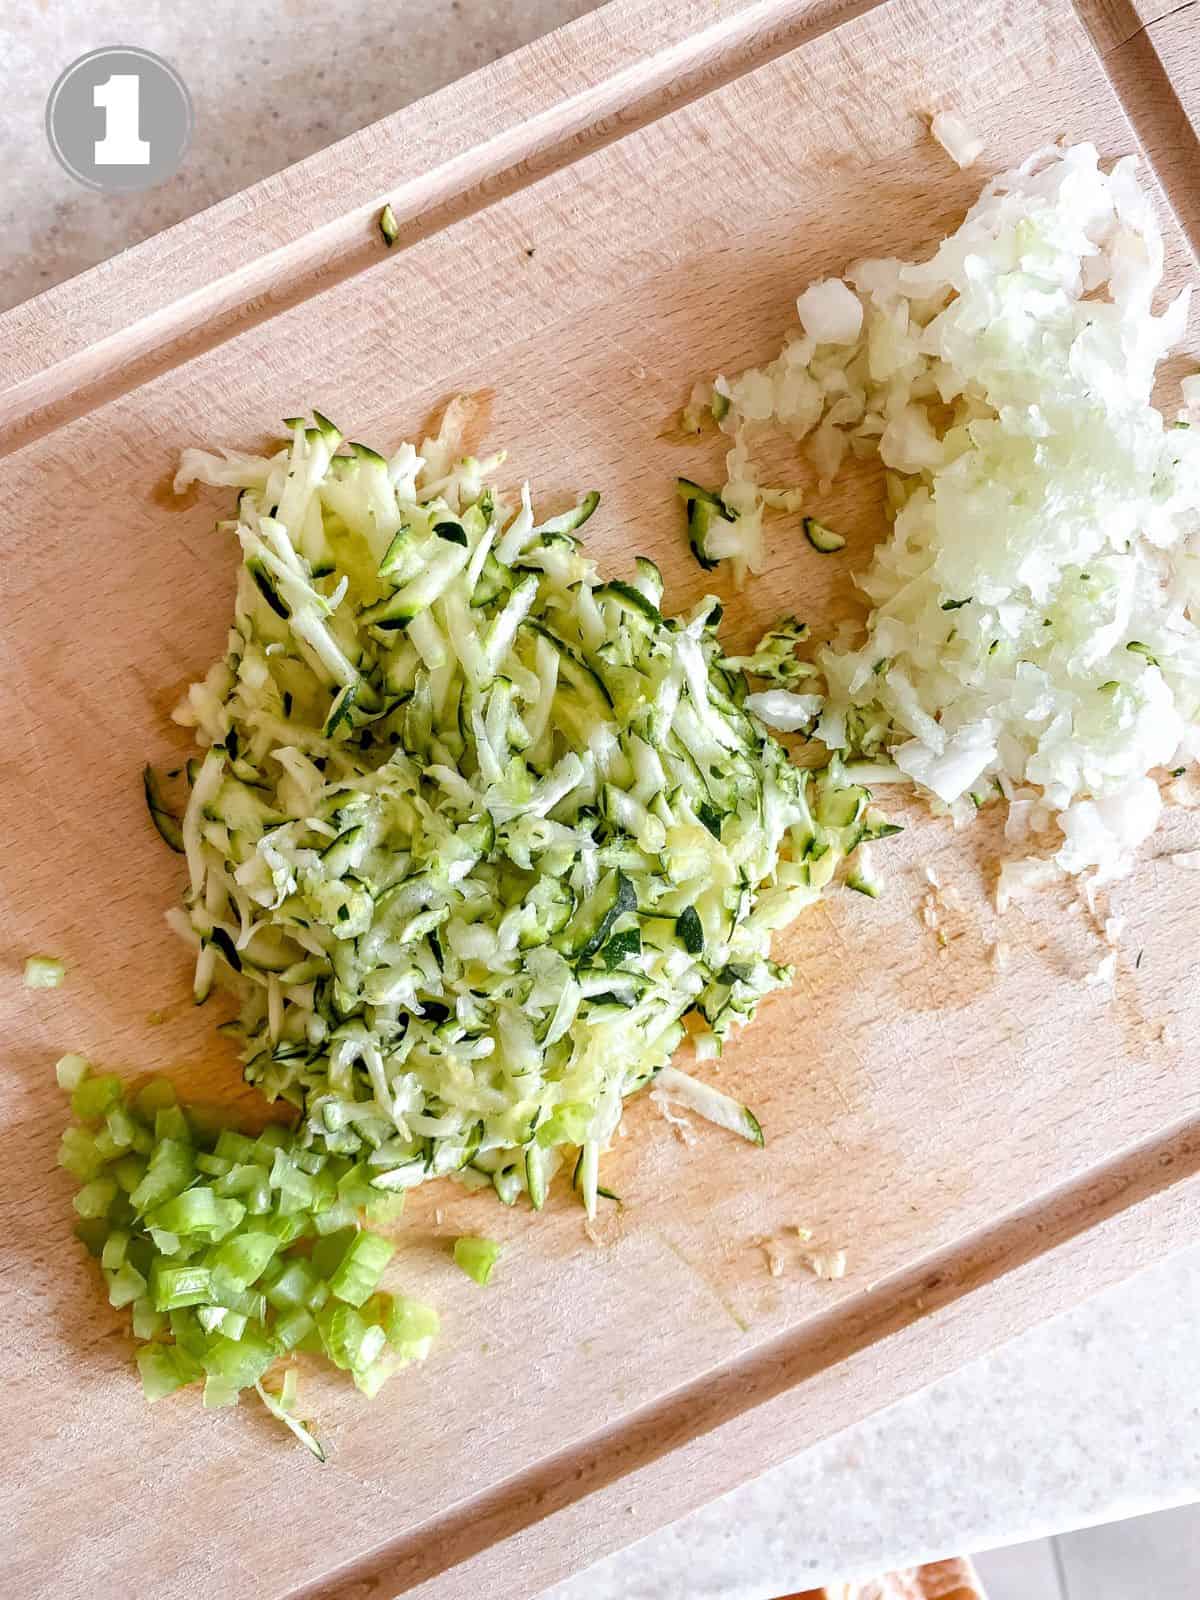 grated onion and zucchini and diced celery on a wooden board numbered one.